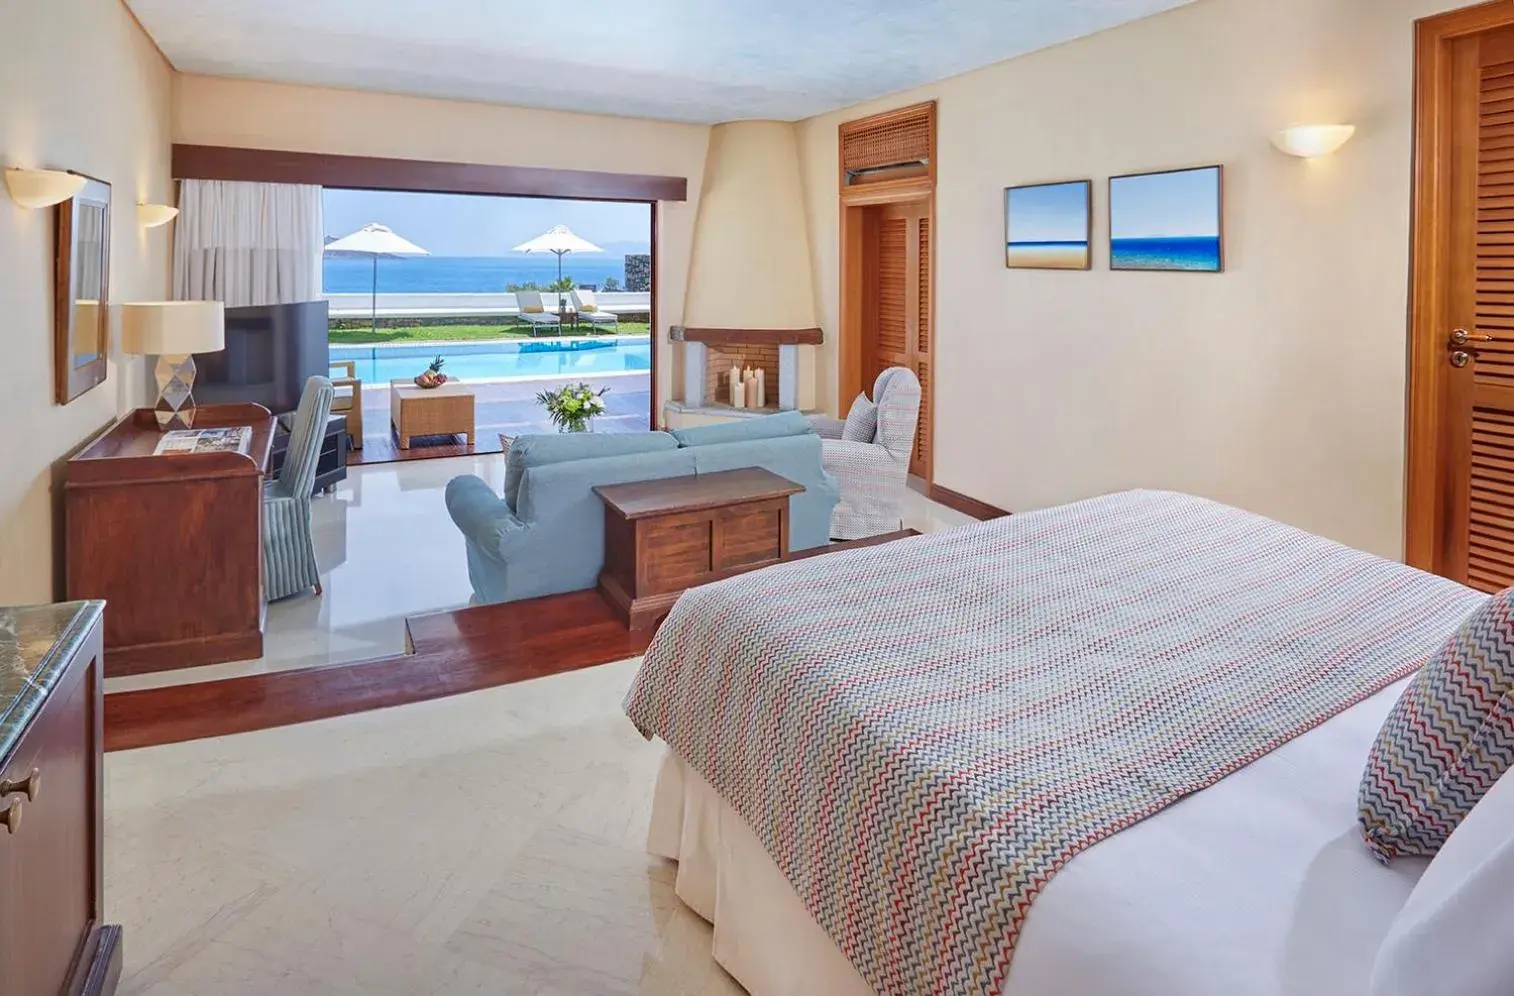 Bedroom in Elounda Beach Hotel & Villas, a Member of the Leading Hotels of the World